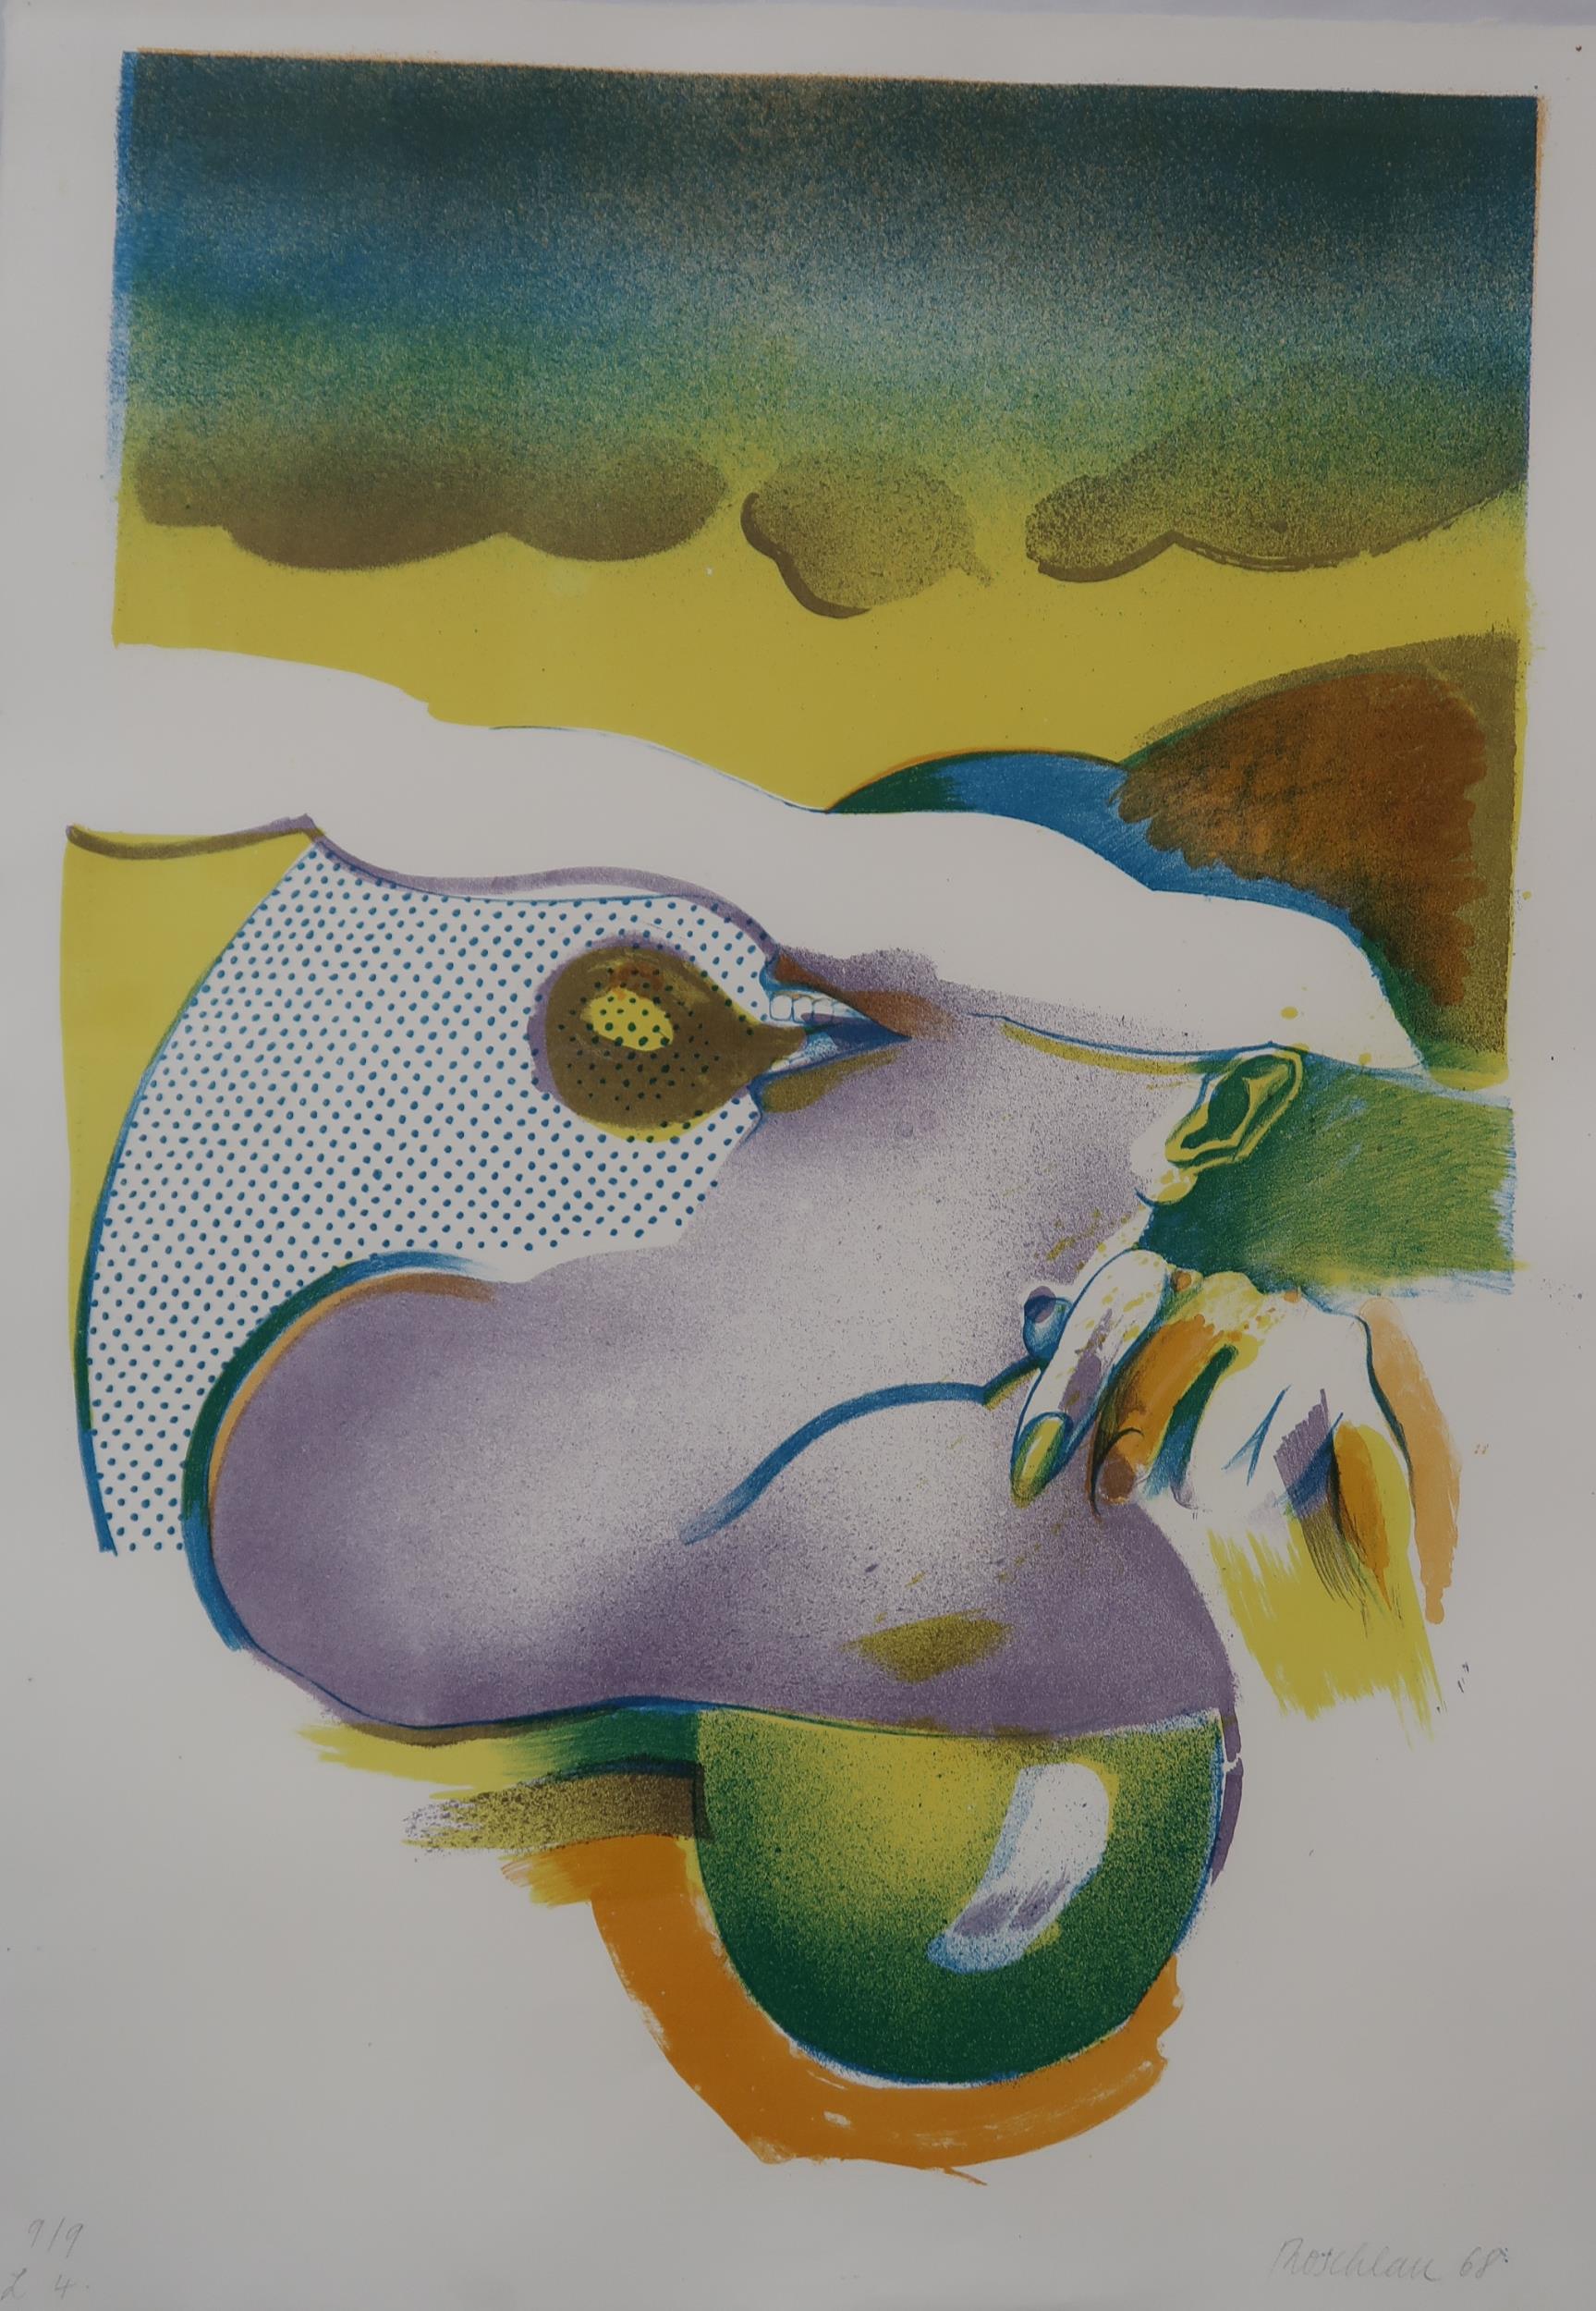 MICHAEL ROSCHLAU (GERMAN b.1942)  ABSTRACT IN YELLOW  Lithograph, signed lower right, dated (19) - Image 5 of 11